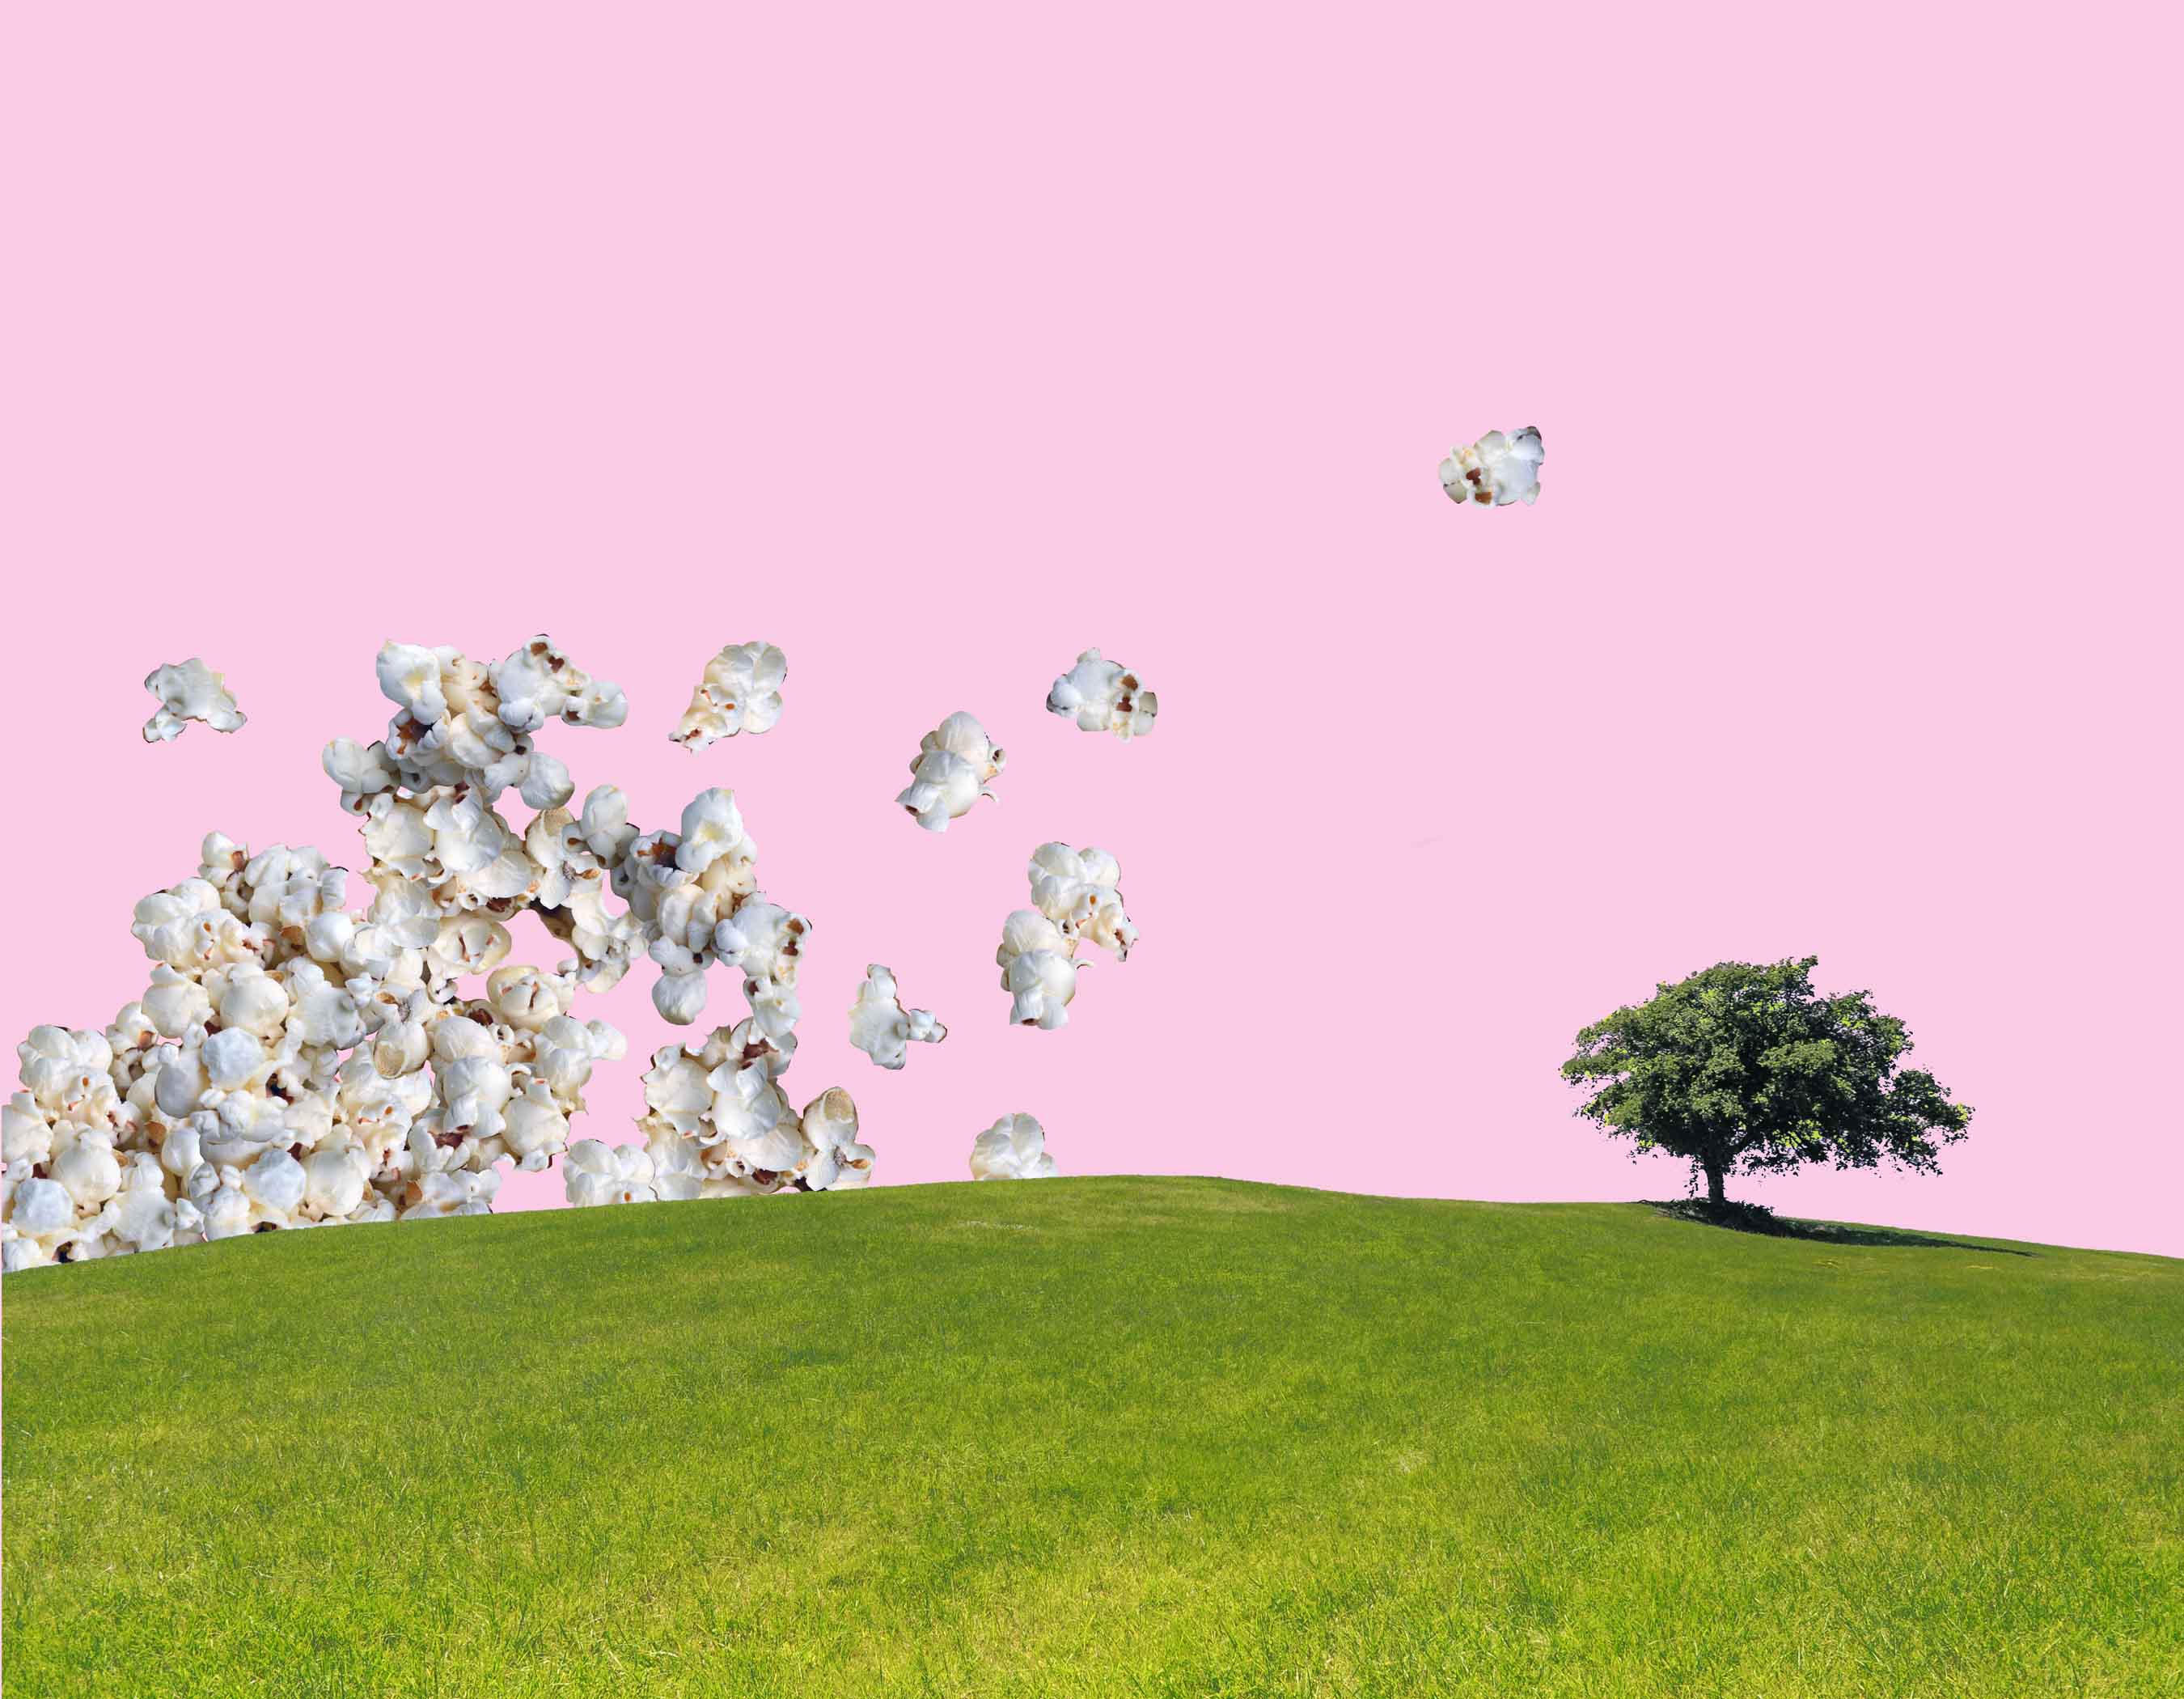 art every day number 417 digital montage pink popcorn sky distraction